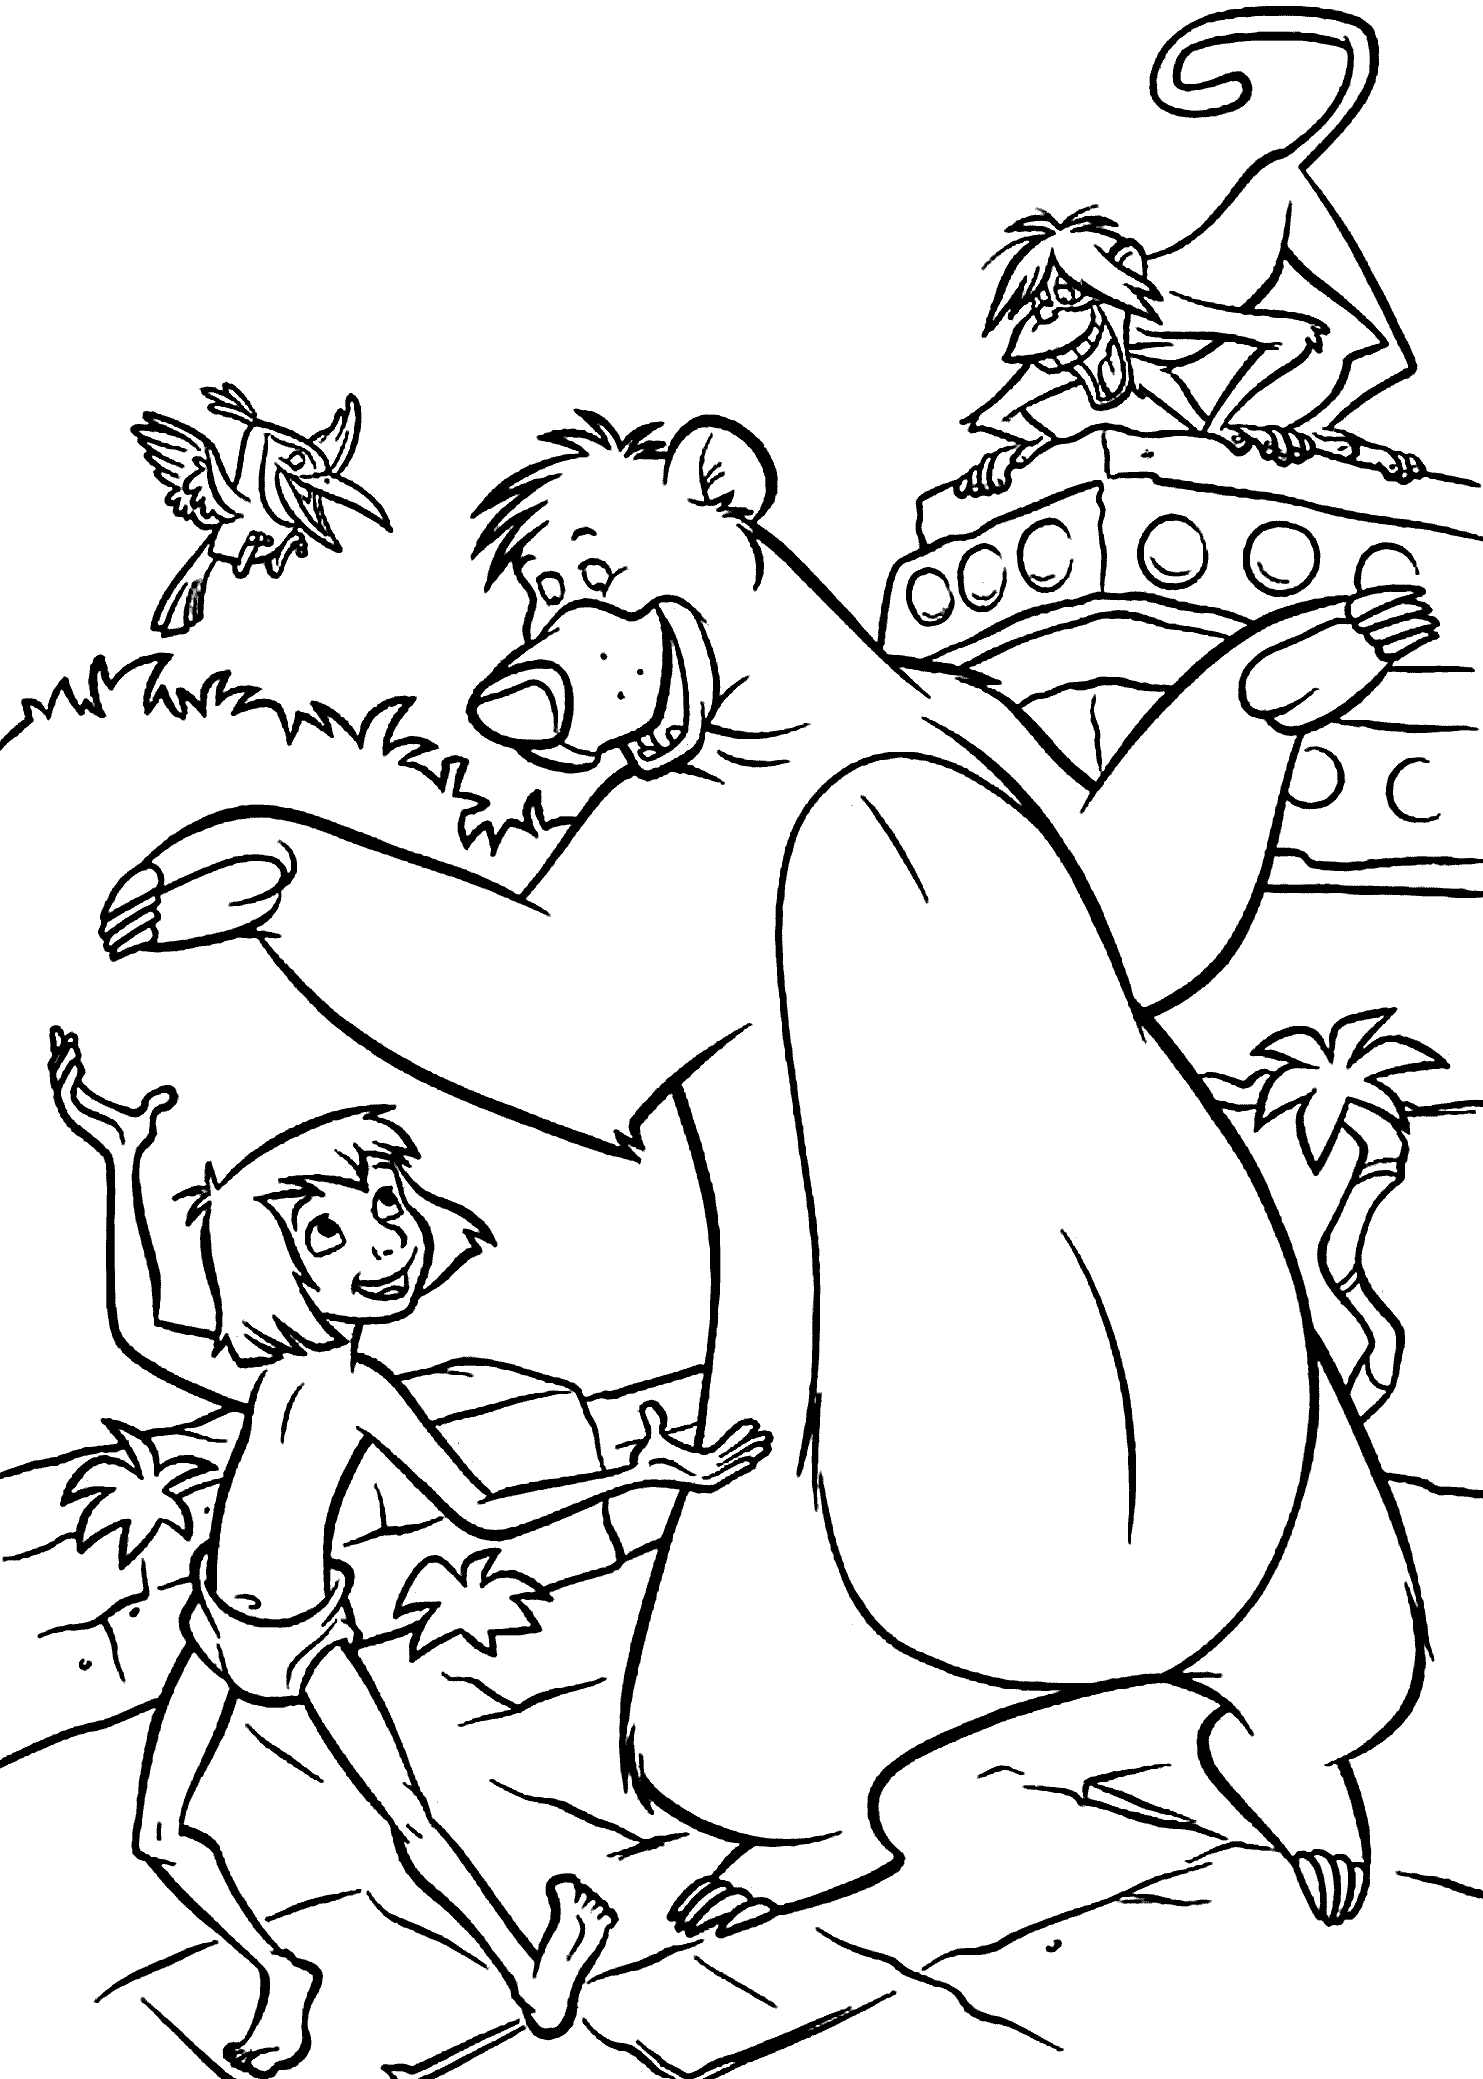 Jungle Book Coloring Pages To Download And Print For Free ...